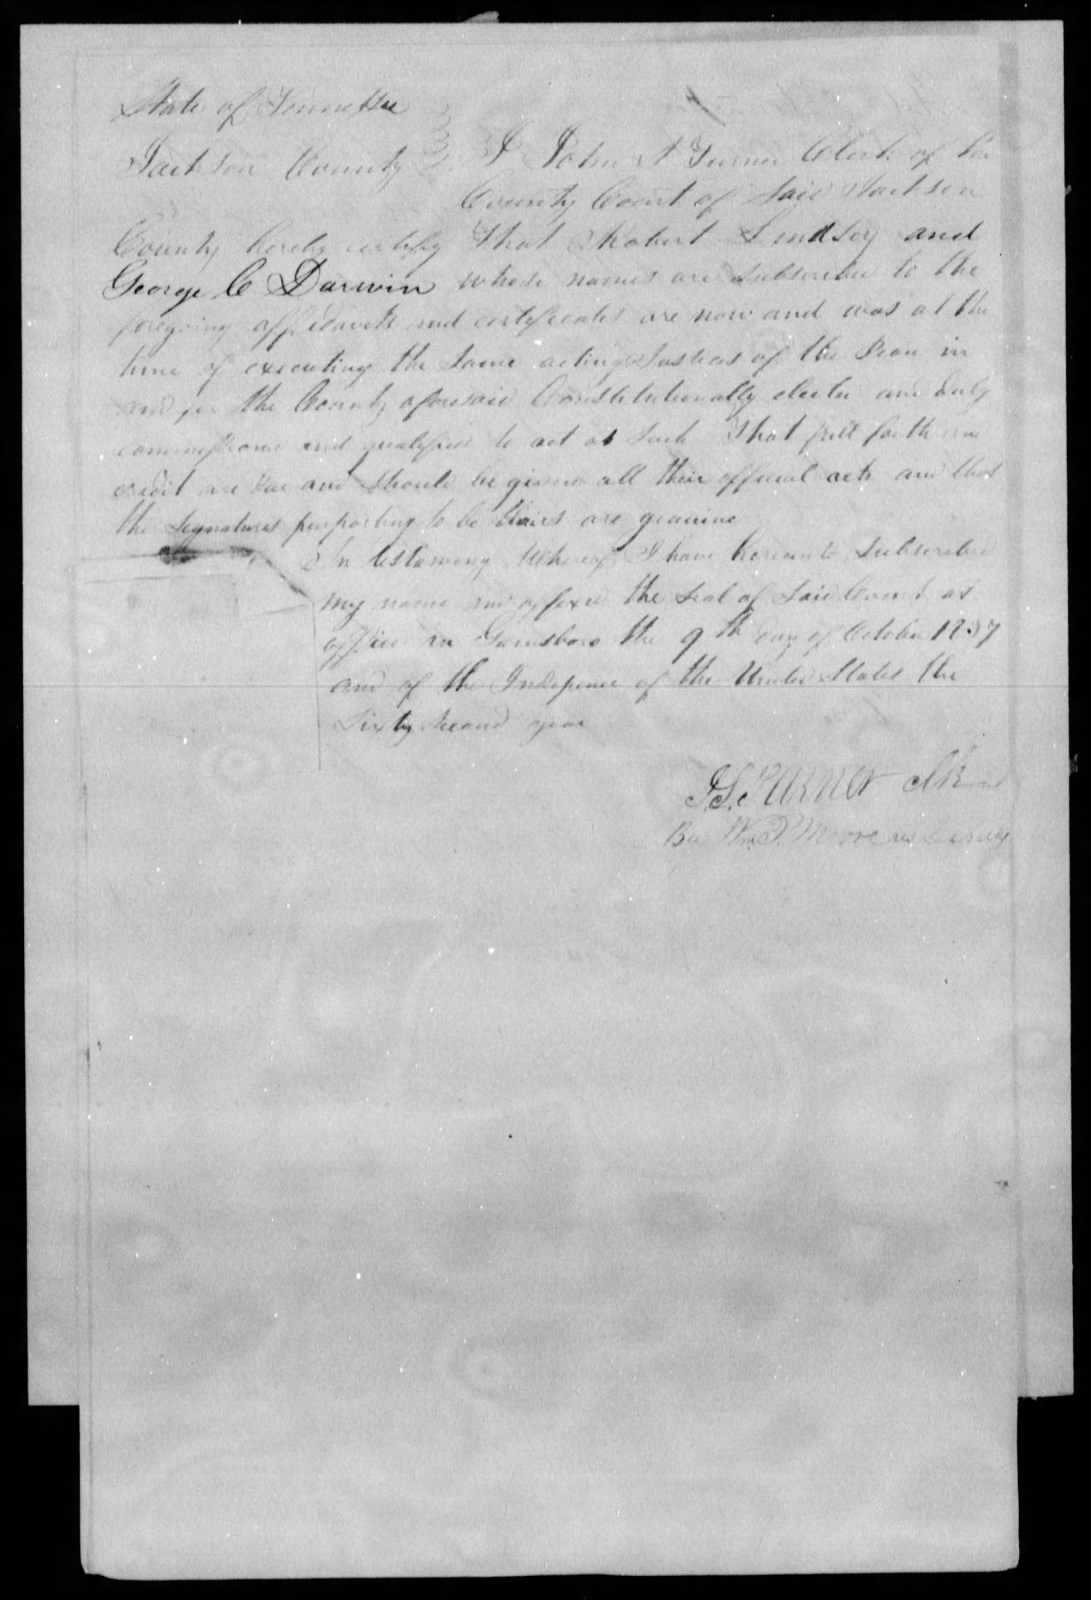 Affidavit of John Allison in support of a Pension Claim for Lydia Ray, 7 October 1837, page 2